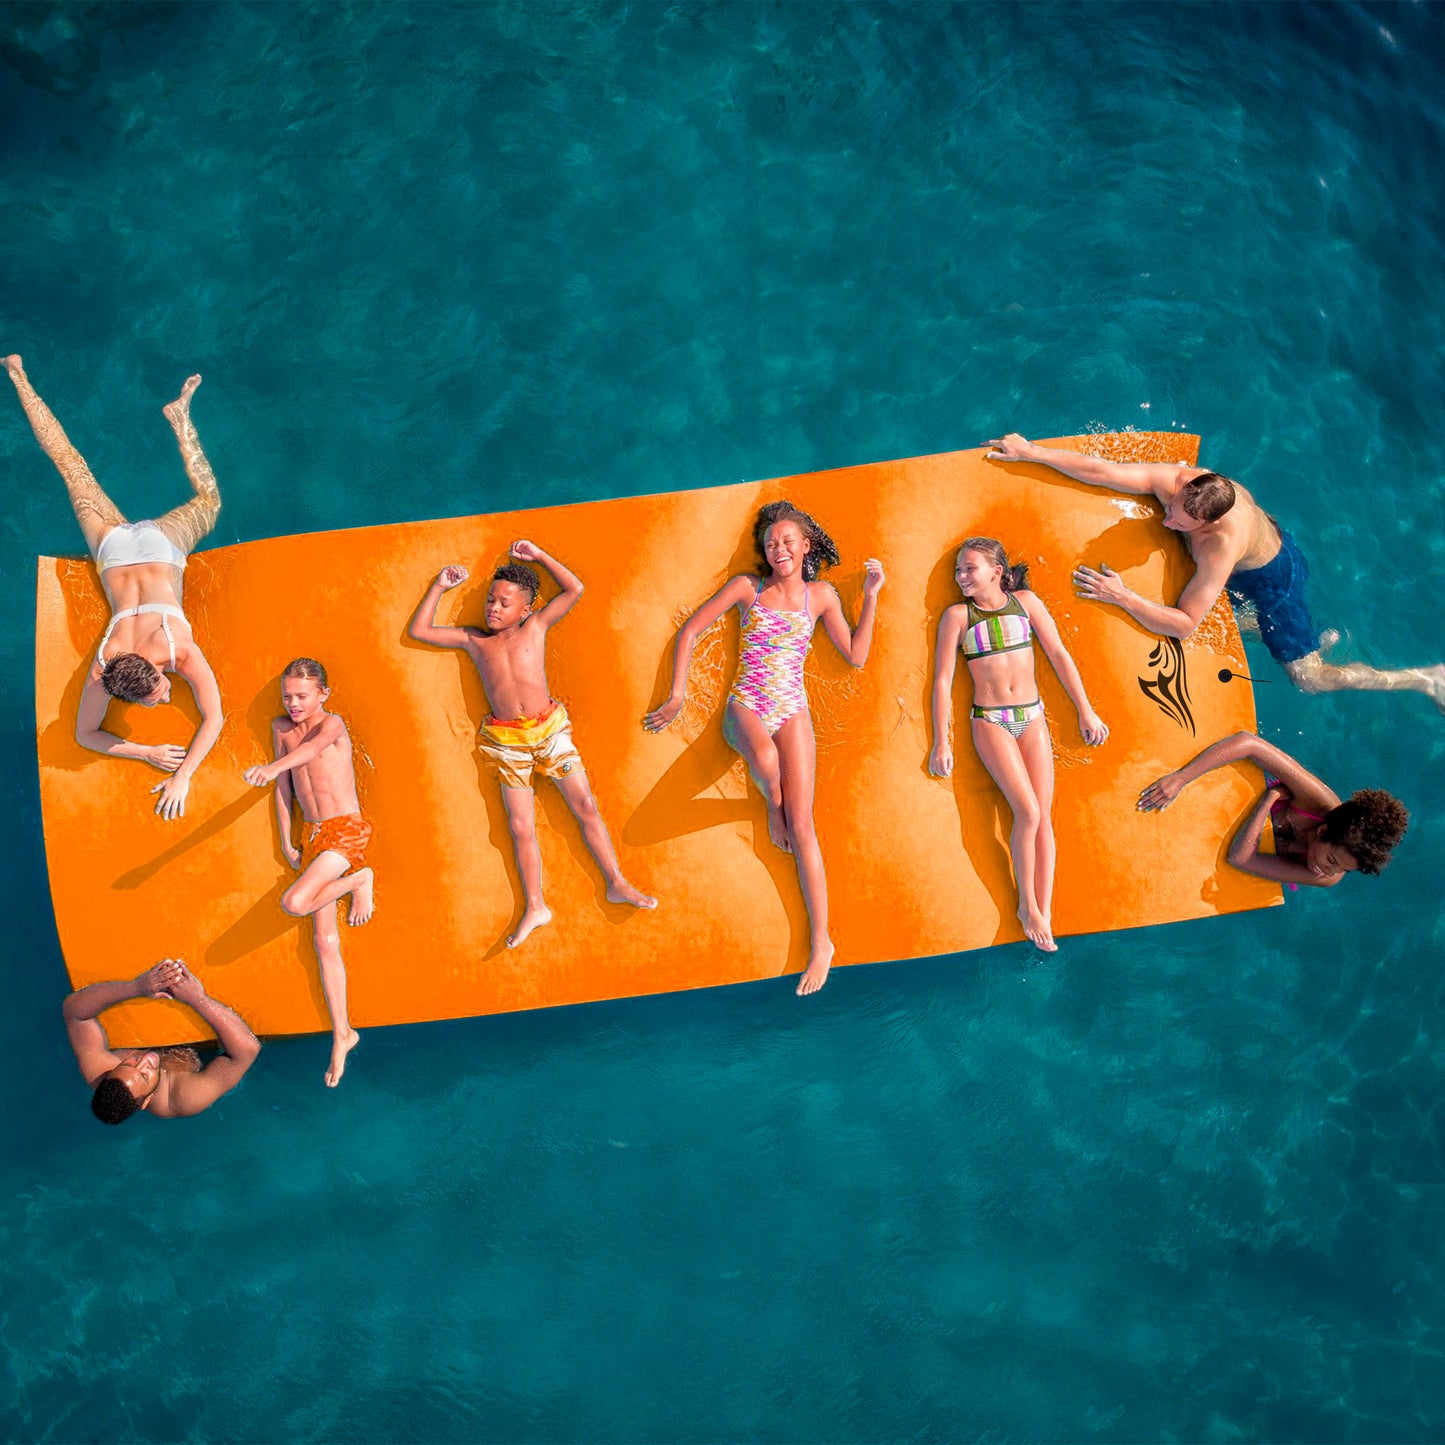 15 x 6 FT Floating Water Mat Foam Pad Lake Floats Lily Pad, 3-Layer XPE Water Pad with Storage Straps for Adults Outdoor Water Activities